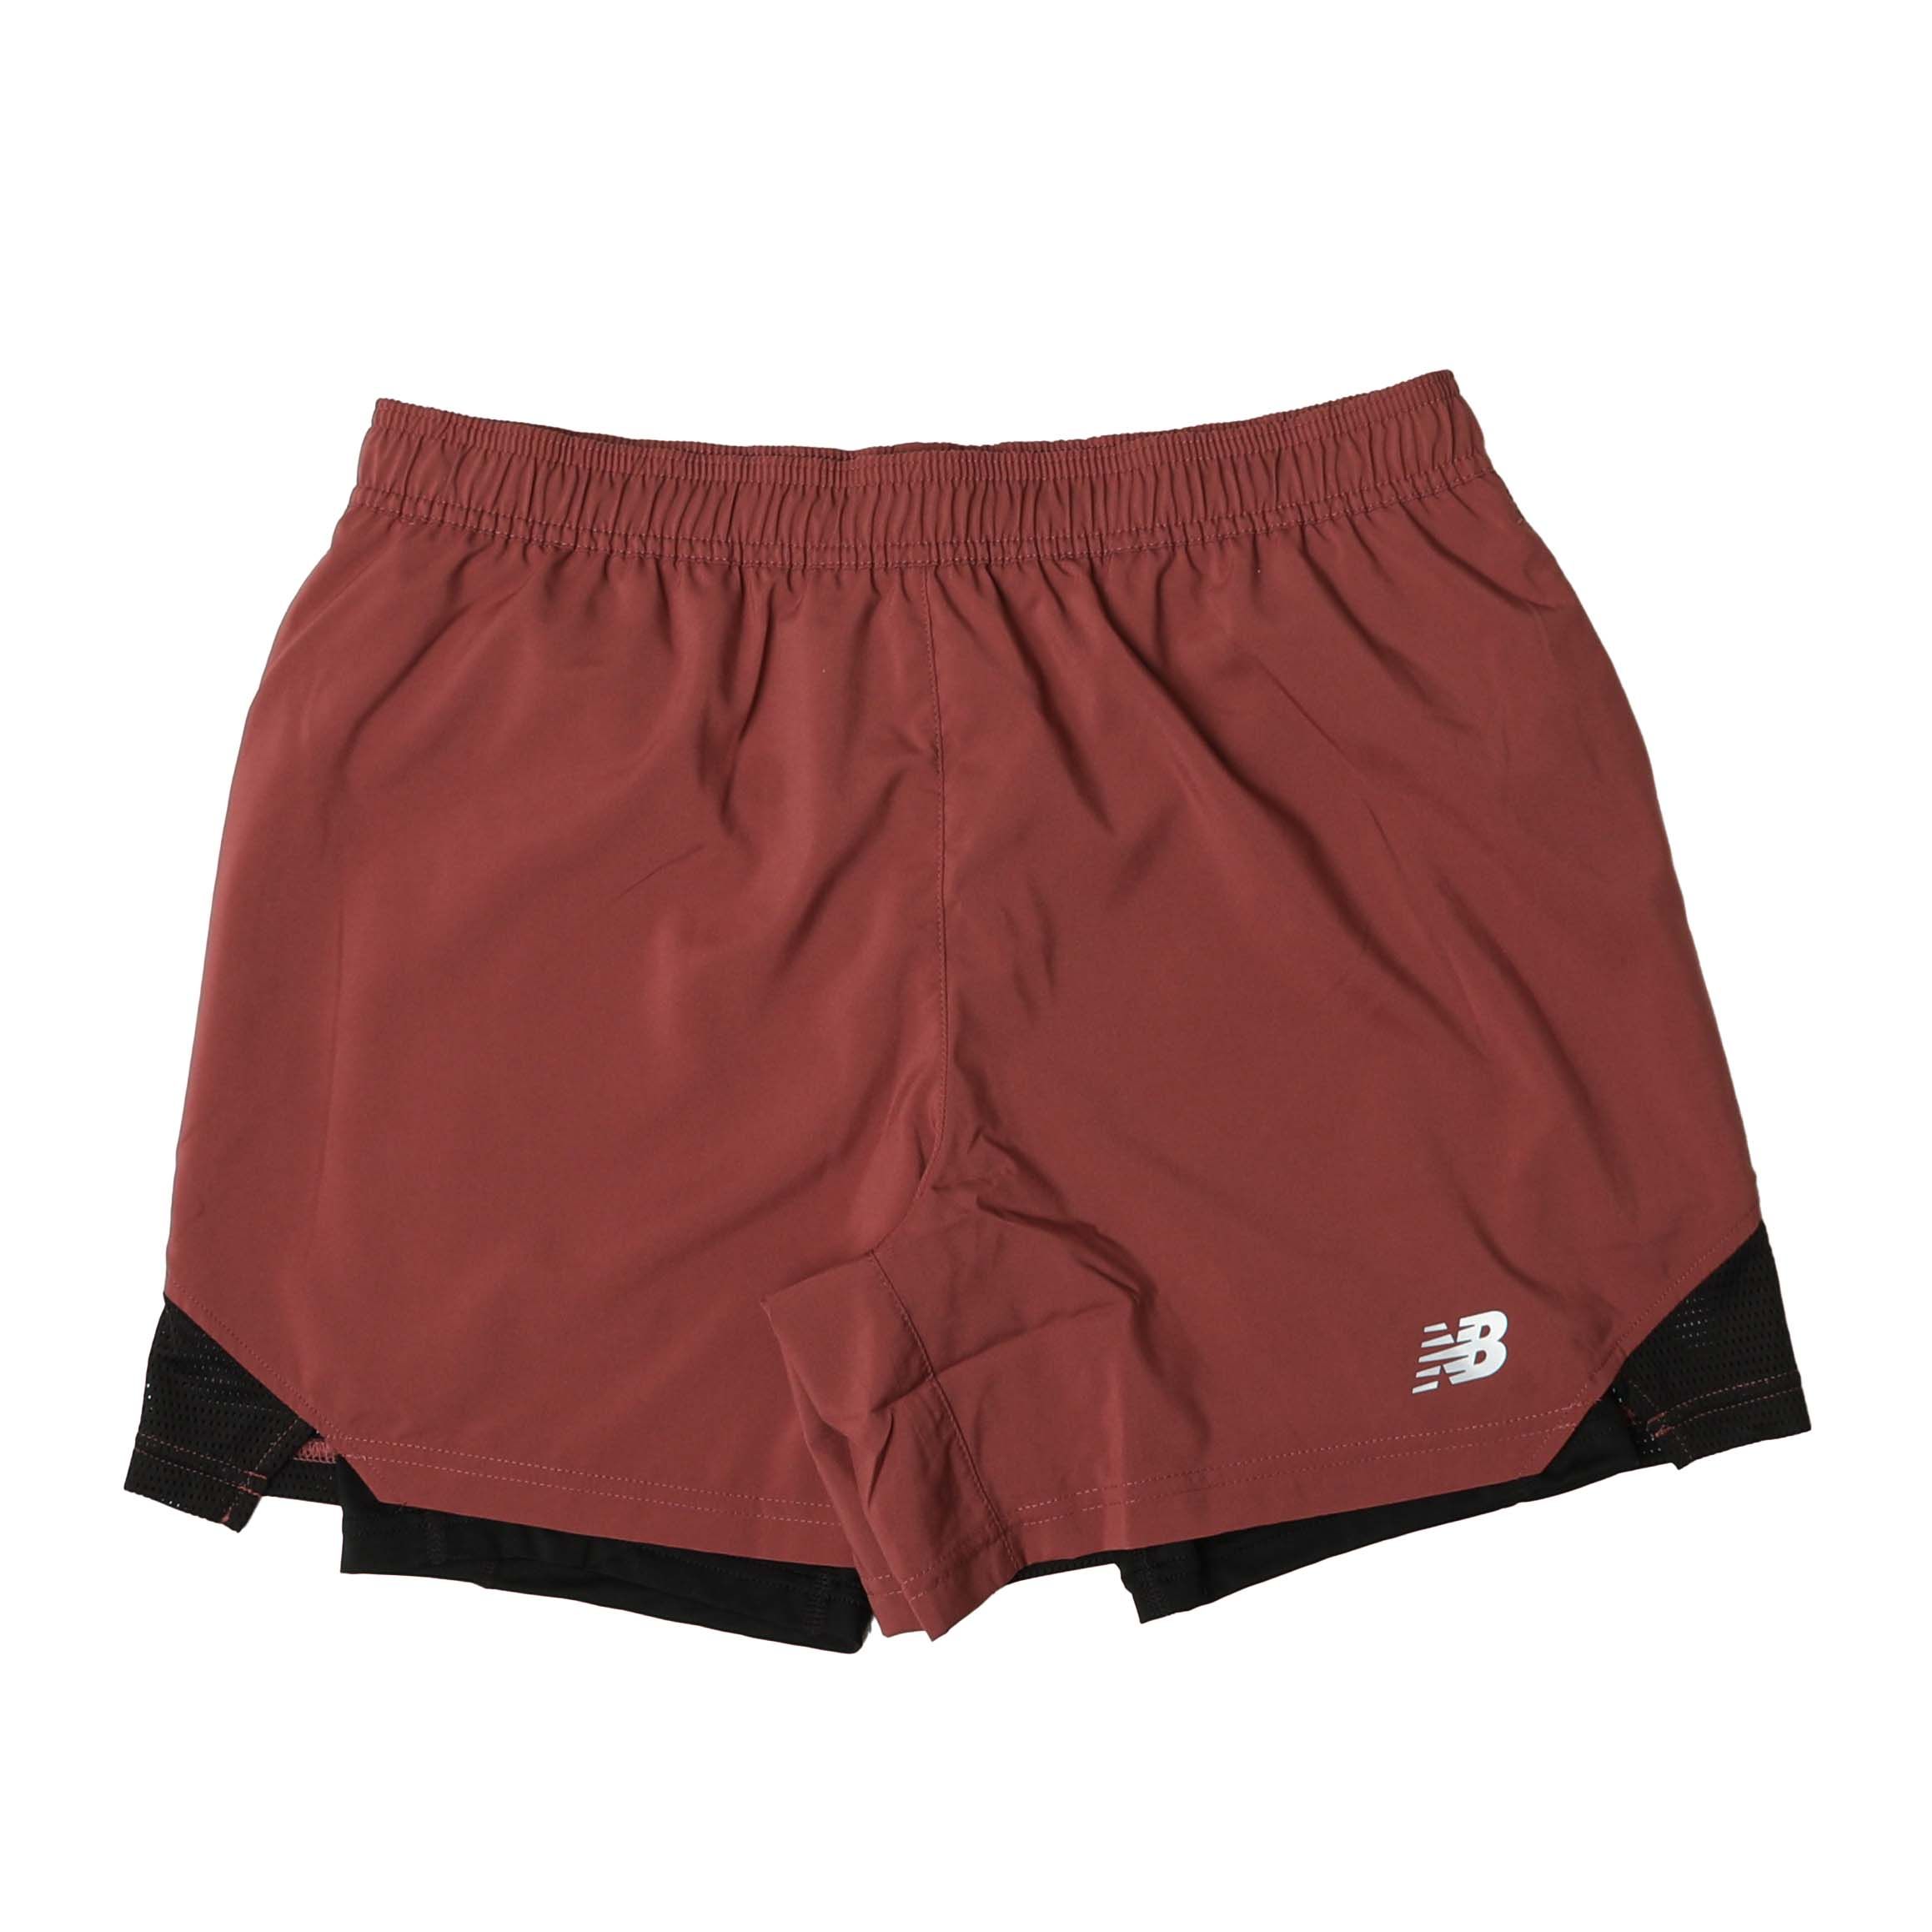 Men's New Balance Accelerate Pacer 5 Inch 2-in-1 Shorts in Burgundy